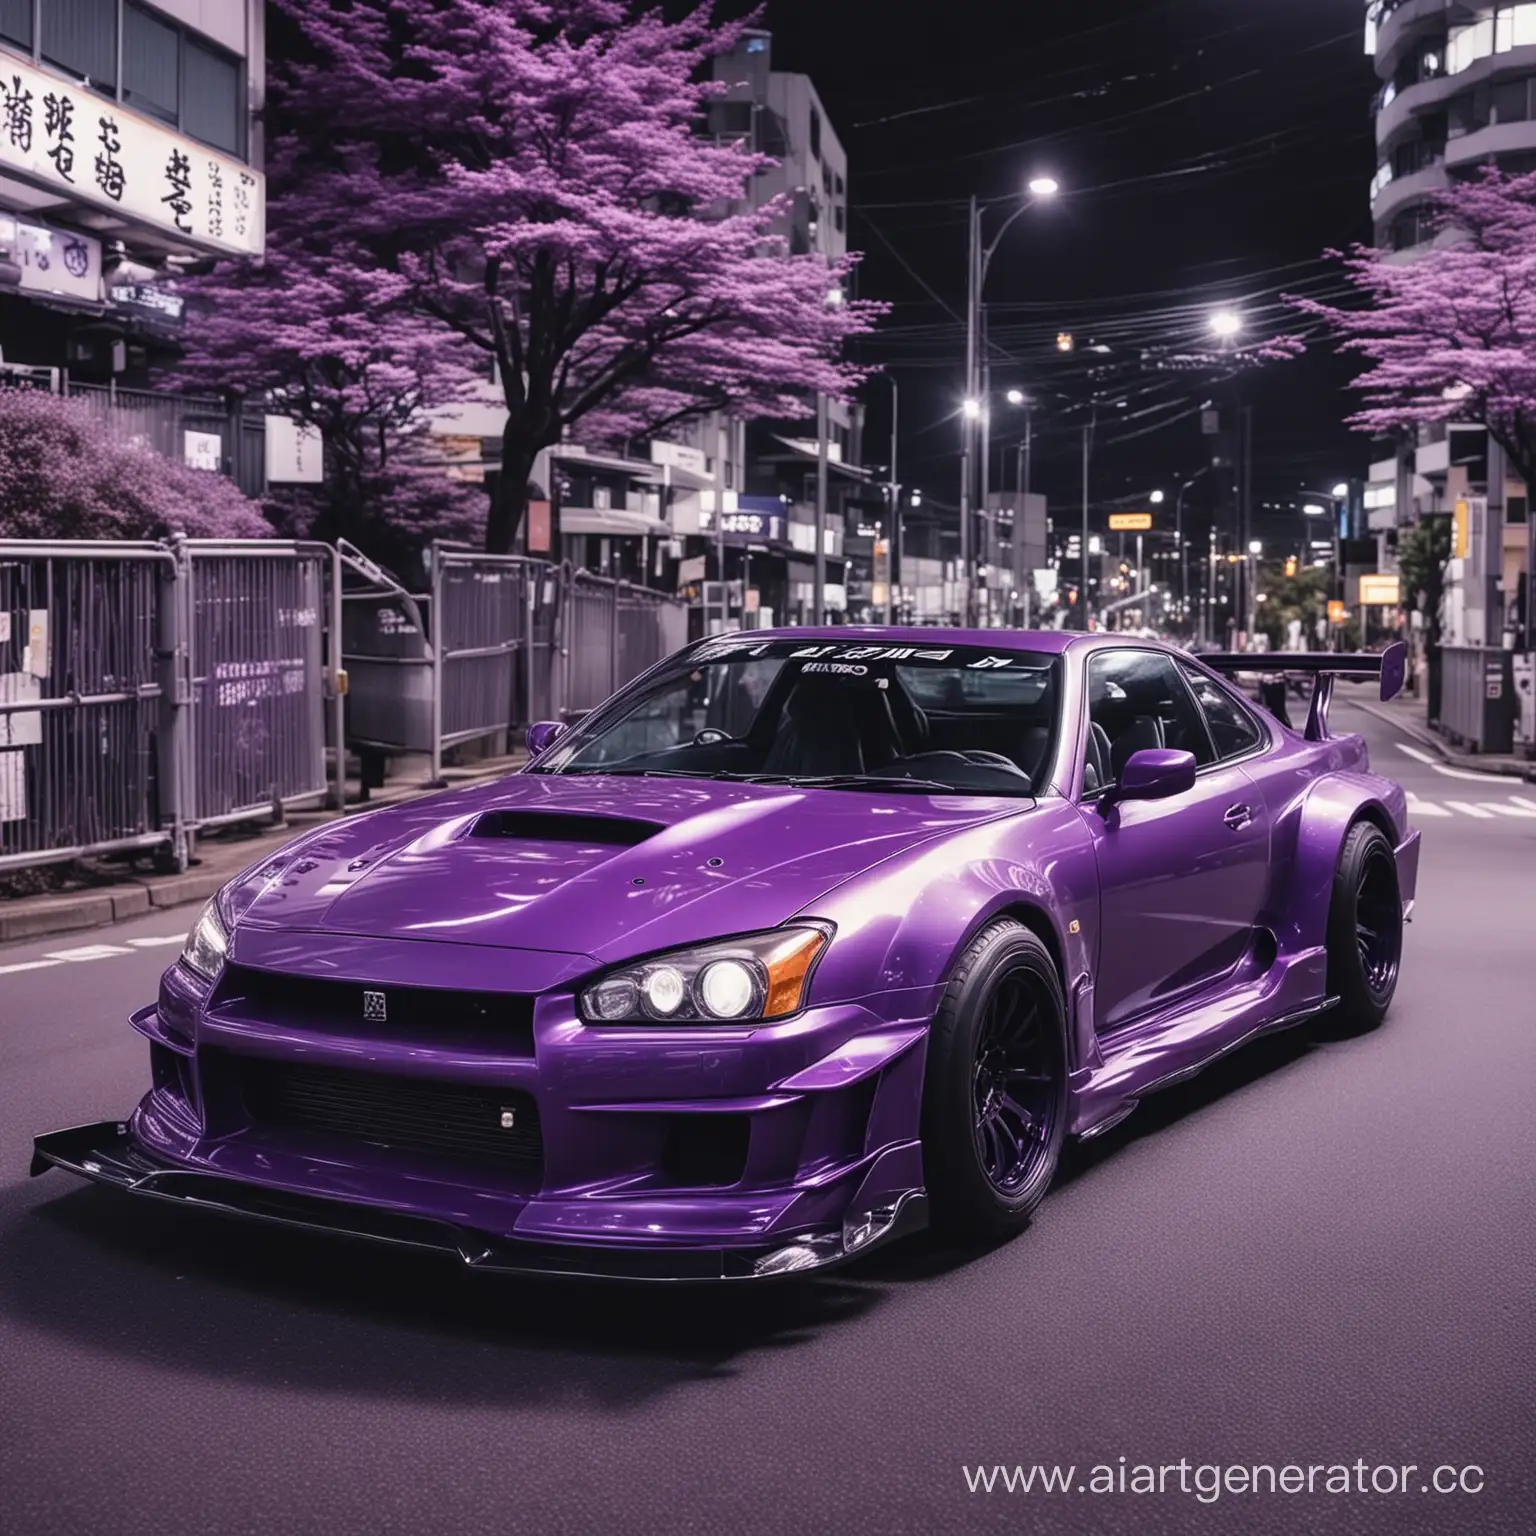 Drift-Car-Racing-in-Nocturnal-Japanese-City-with-Purple-Accent